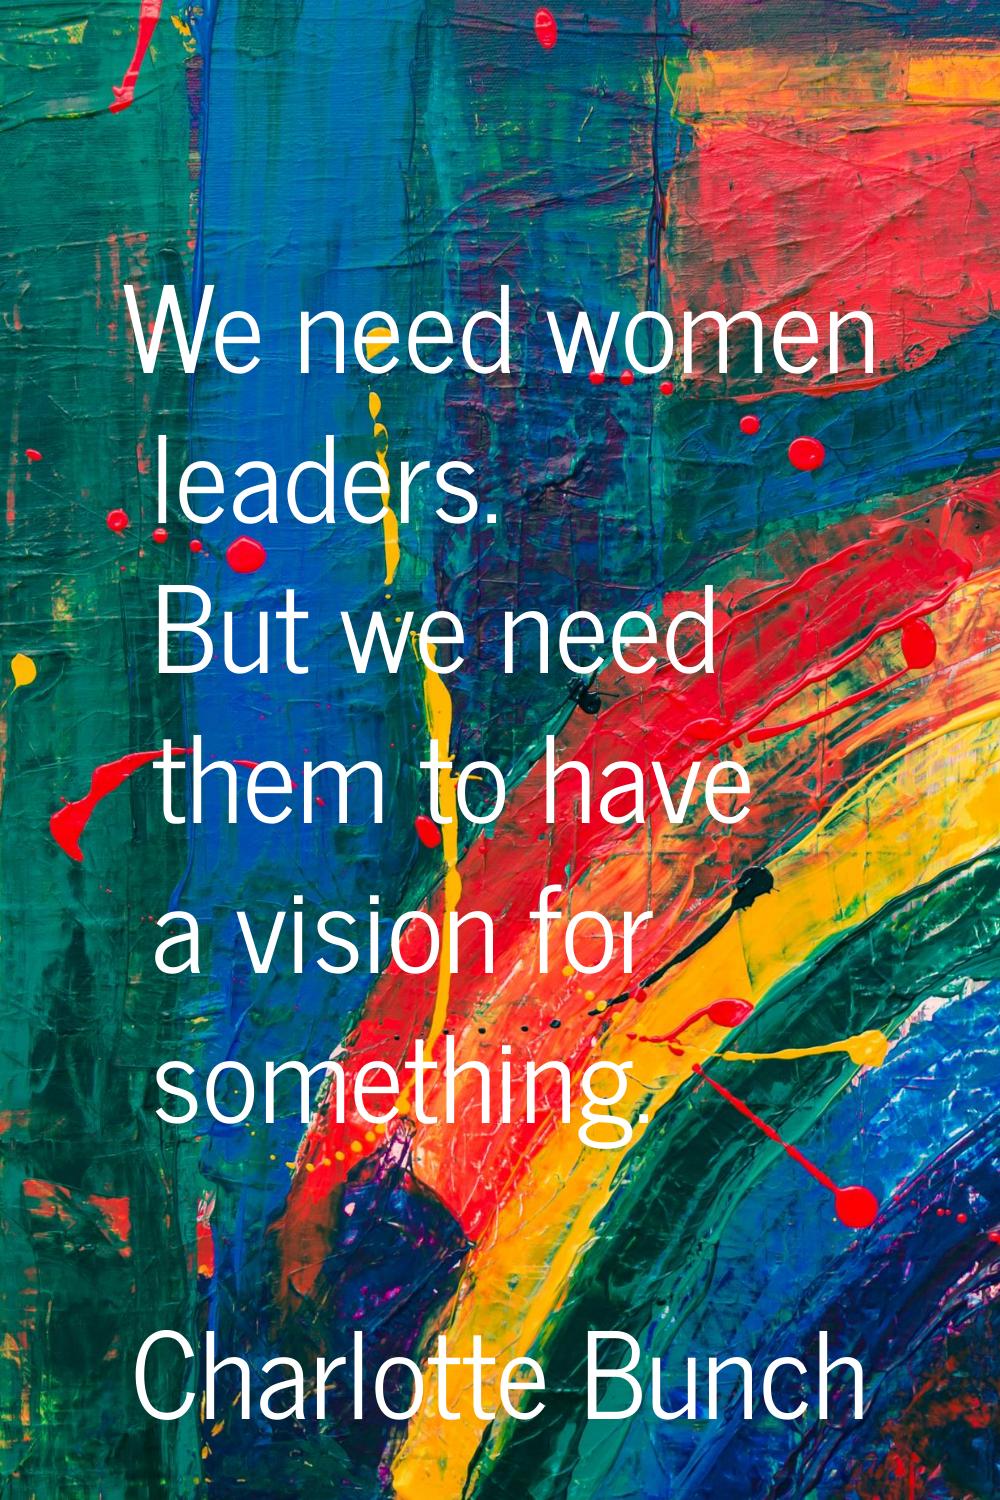 We need women leaders. But we need them to have a vision for something.